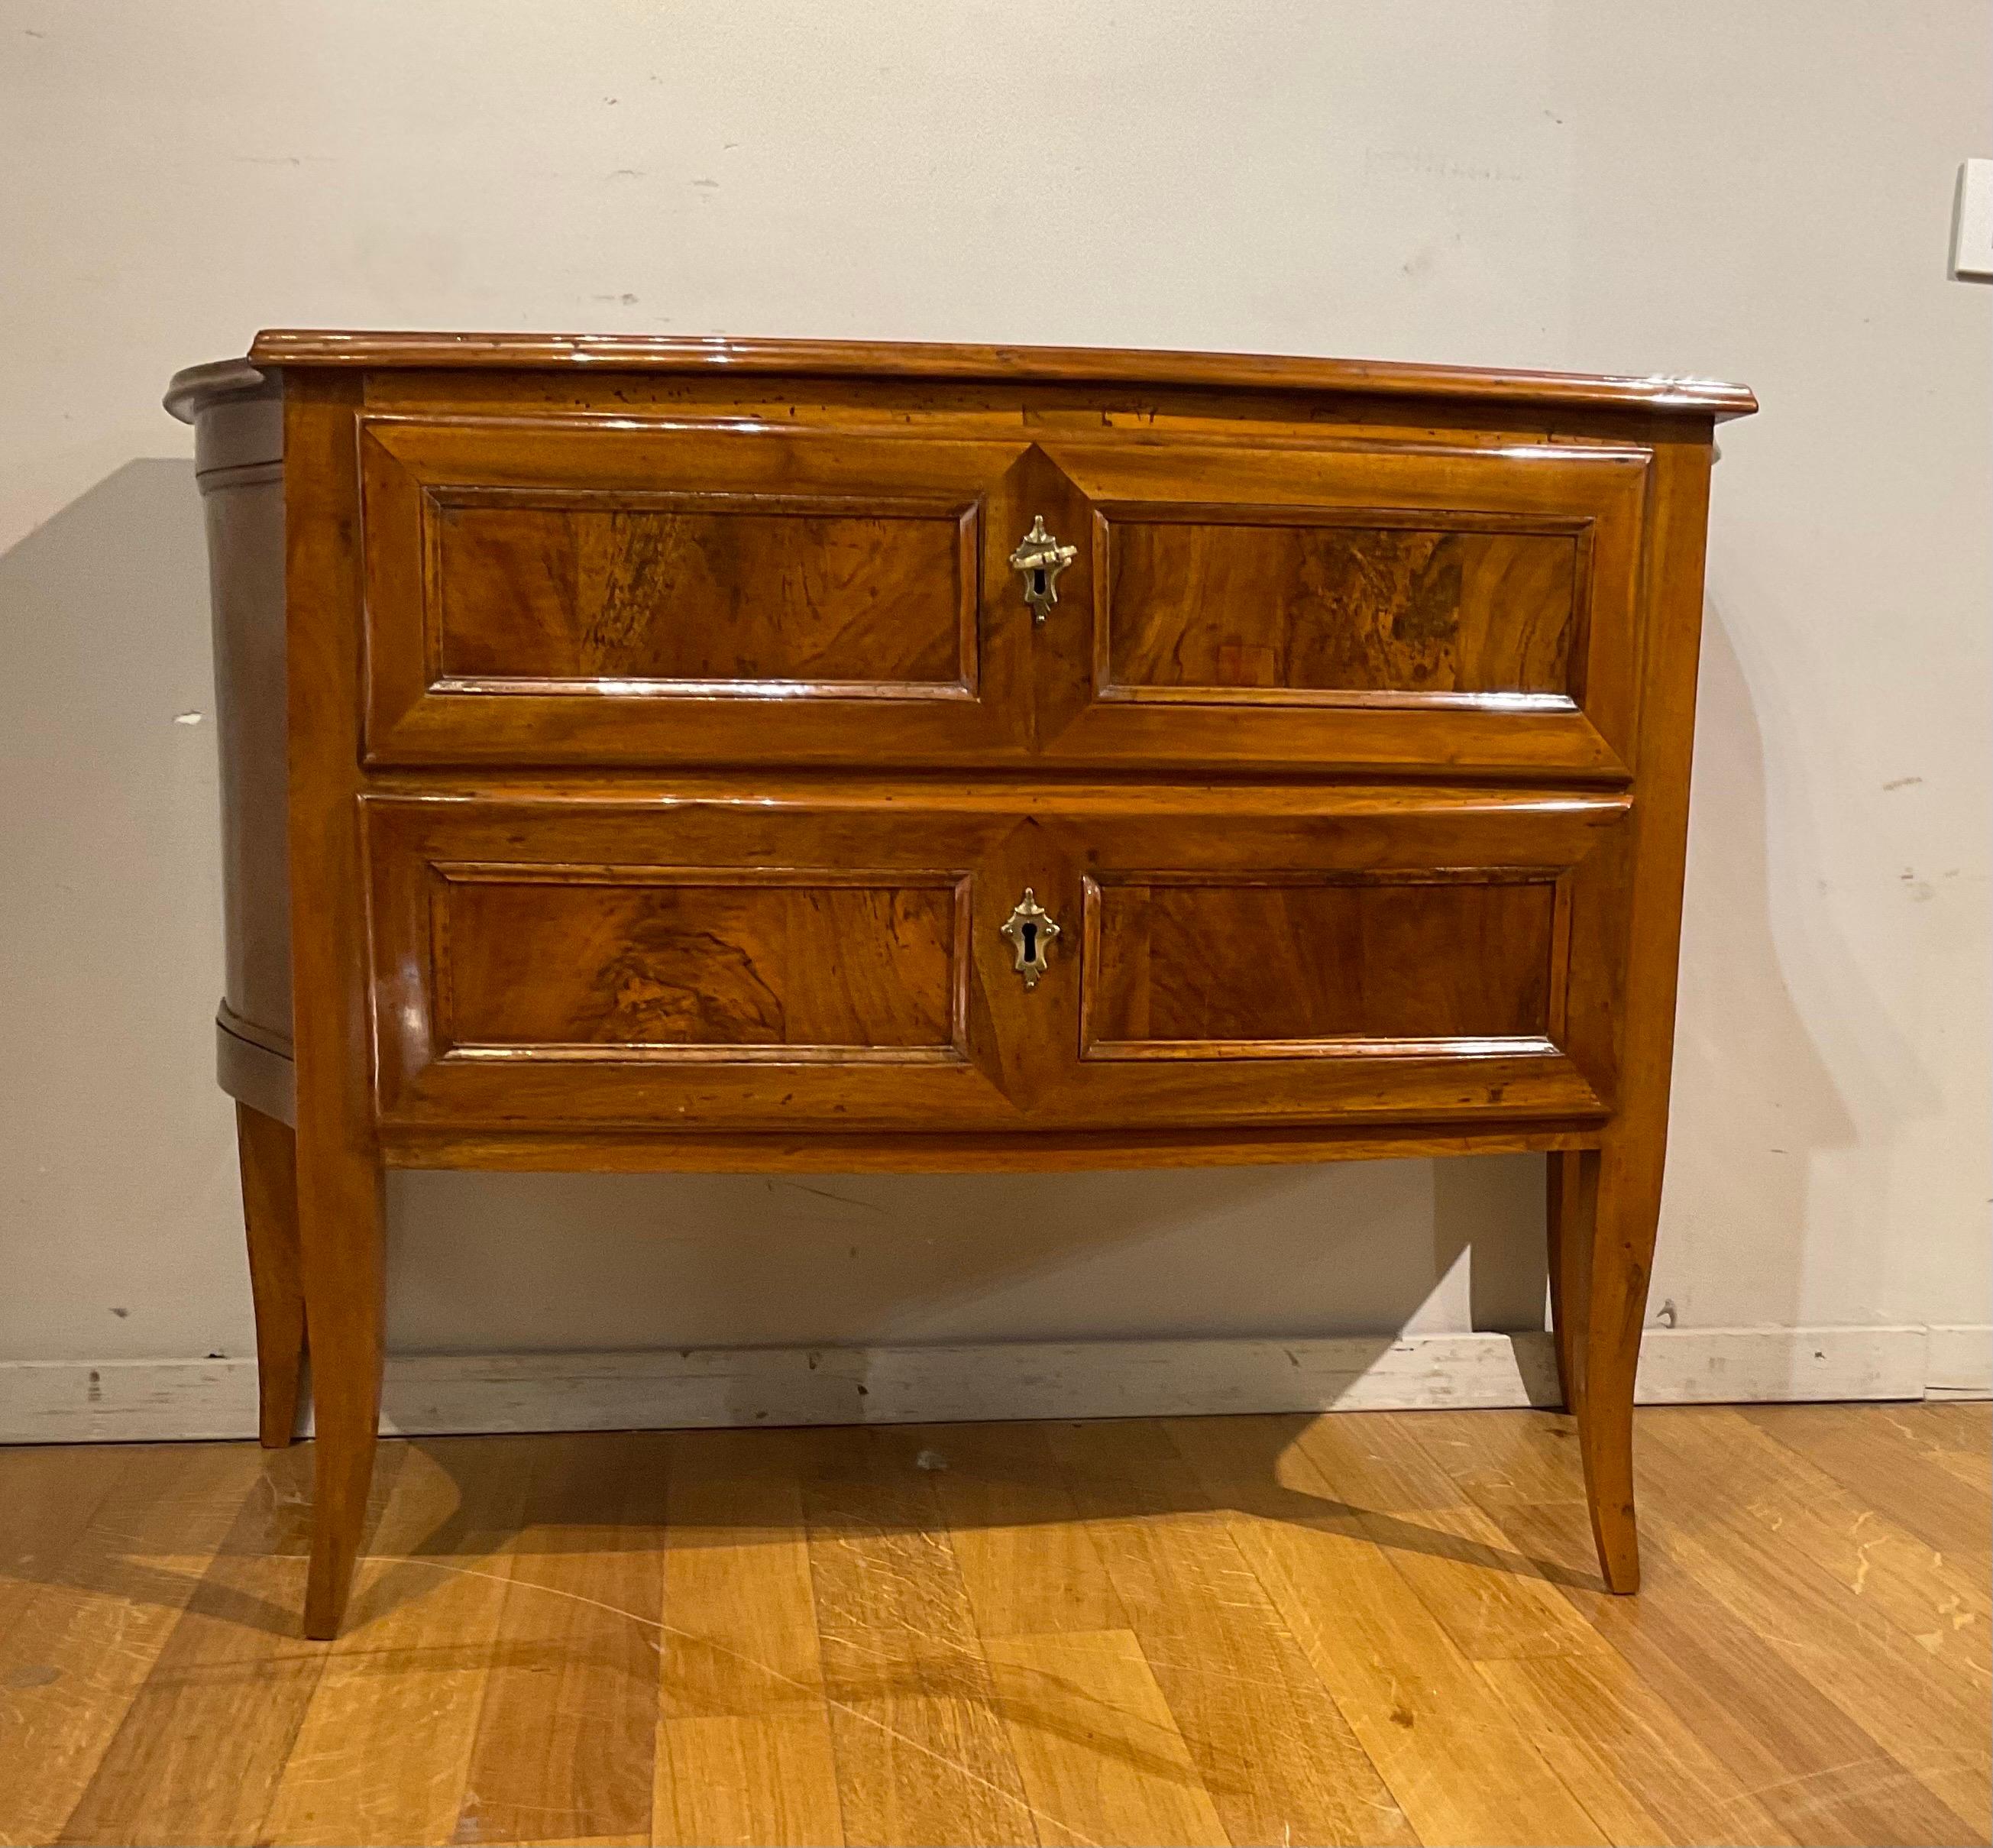 beautiful chest of drawers in solid walnut with shaped front and sides, with two comfortable drawers. Very elegant are the four curved legs that make it very slender. Nn has live woodworms. Good state of conservation. Italian manufacture 18th